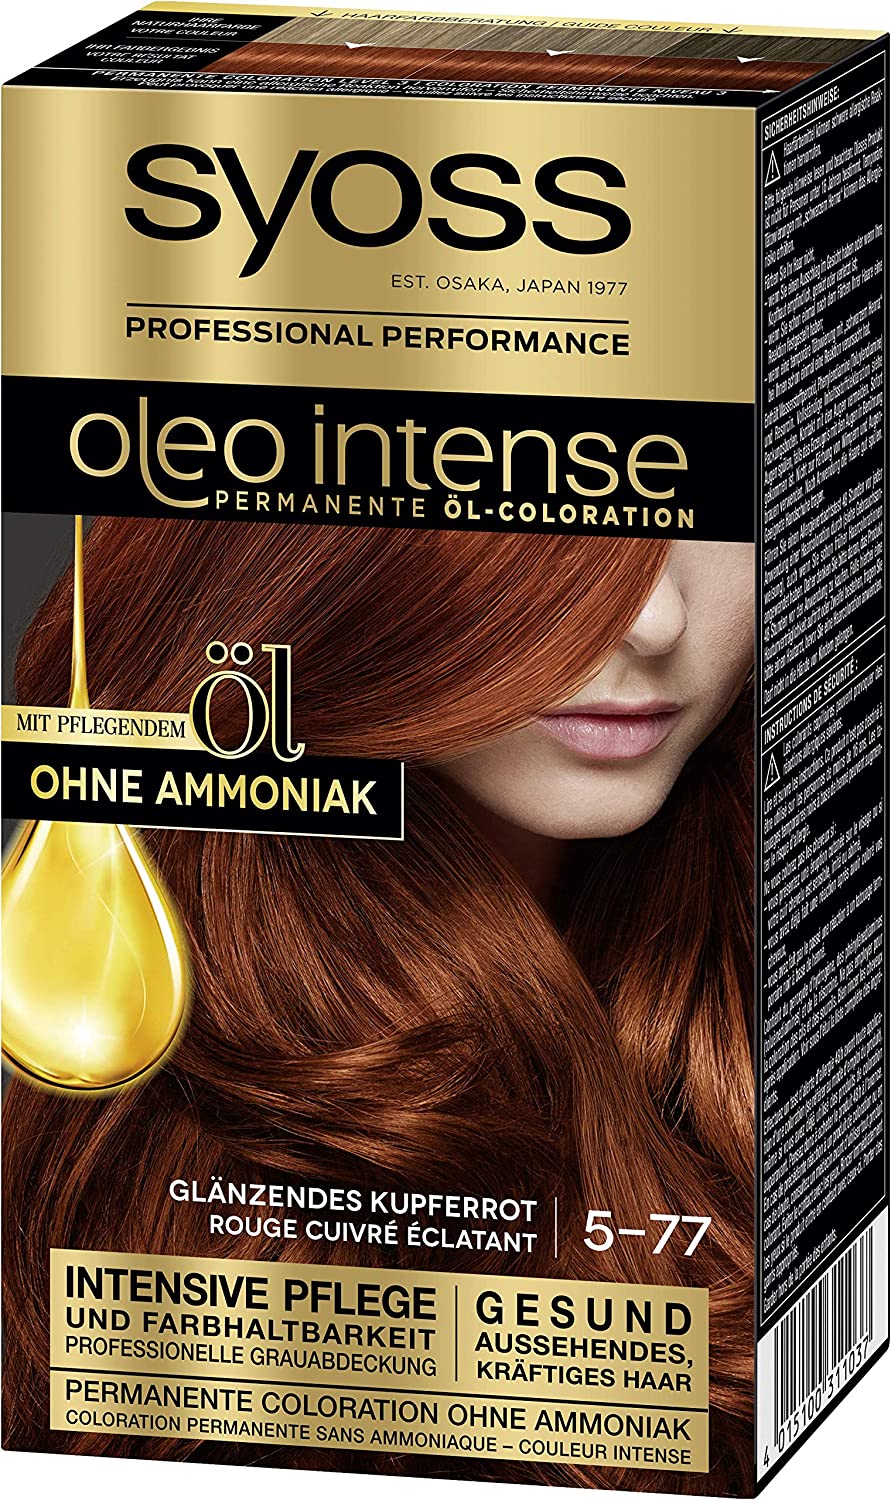 Syoss Oleo Intense Permanent Oil Colouration Hair Colour, 5-77 Shiny Copper Red with Nourishing Oil and Ammonia Free, Pack of 3 (3 x 115 ml), ‎shiny